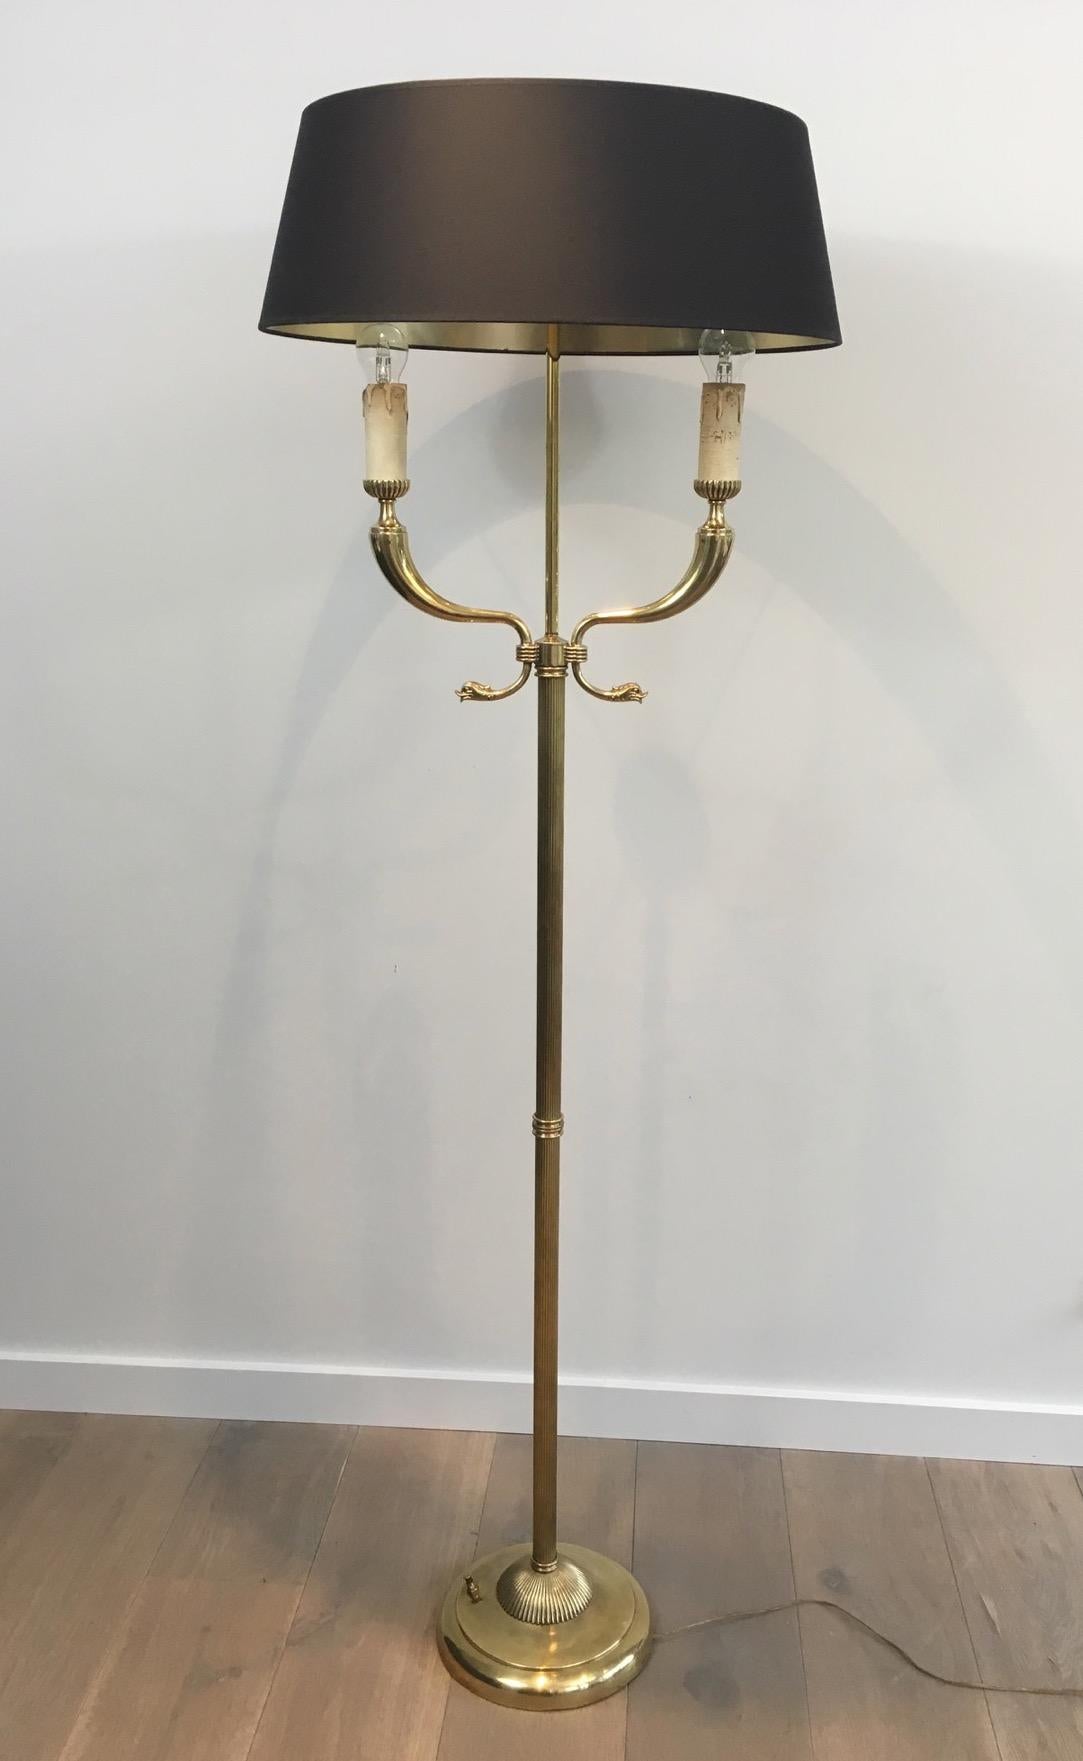 French Attibuted to Maison Jansen, Brass Floor Lamps with Dolfinheads, circa 1960 For Sale